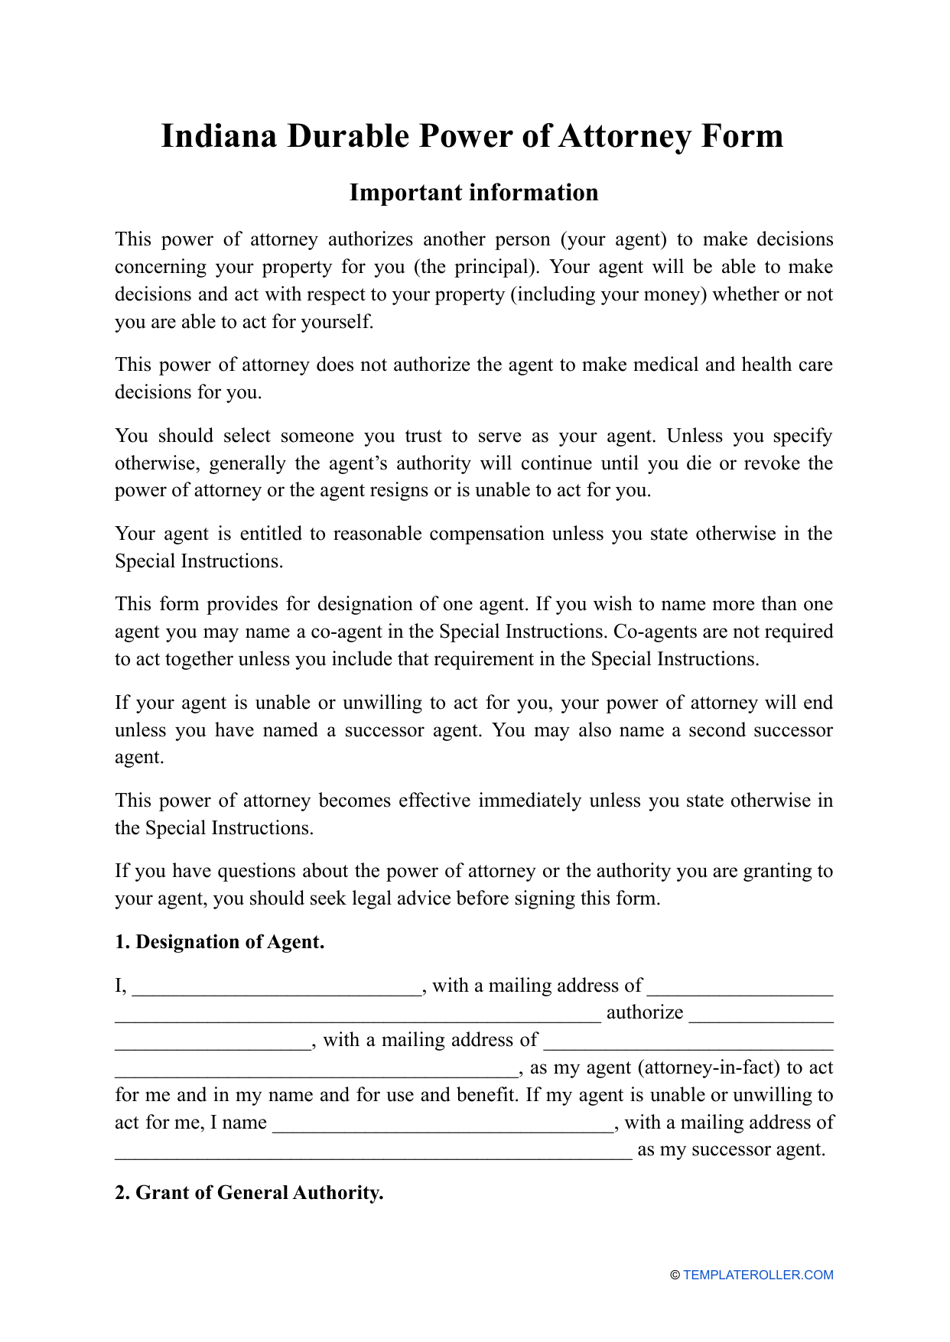 Durable Power of Attorney Form - Indiana, Page 1